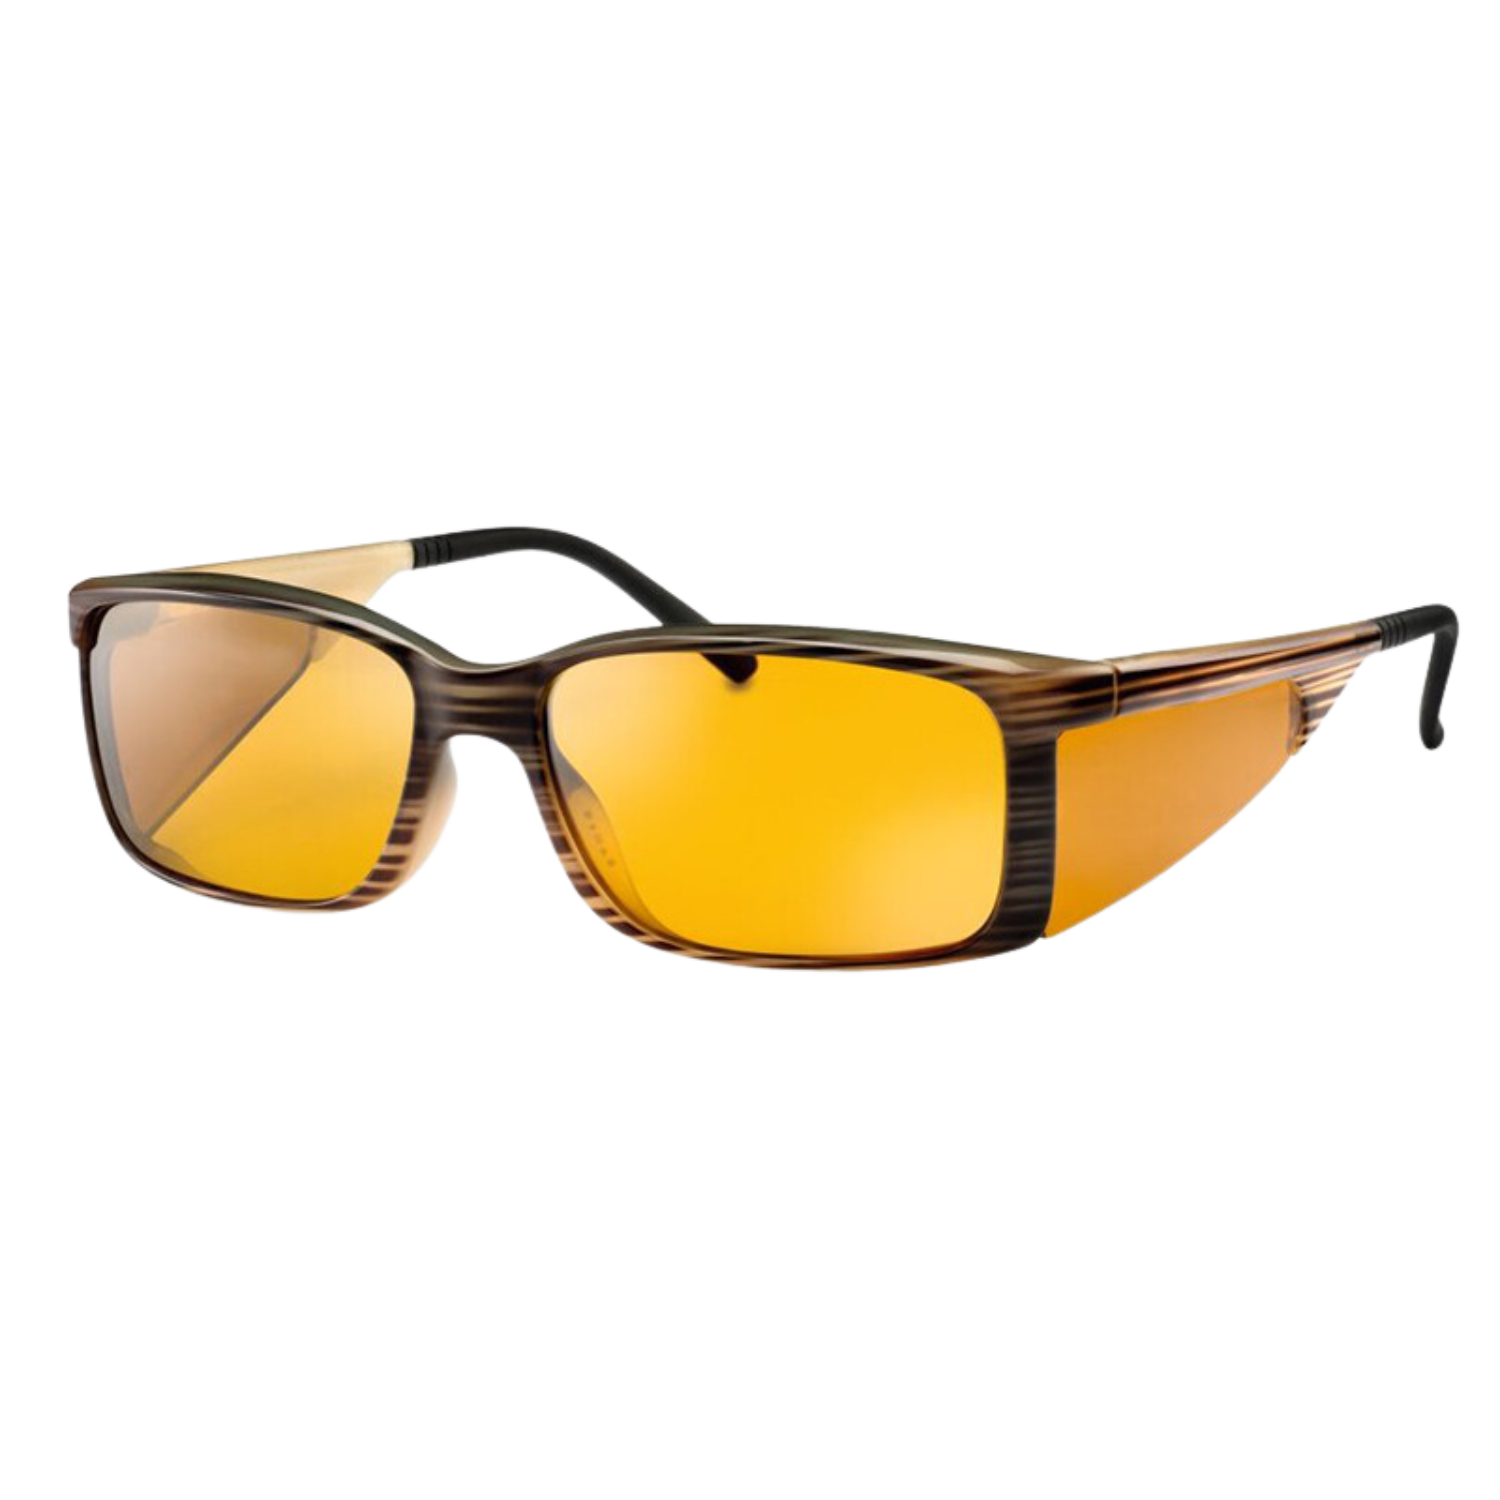 Image of the Eschenbach Ambelis blue light glasses with unisex brown frames and amber lenses.